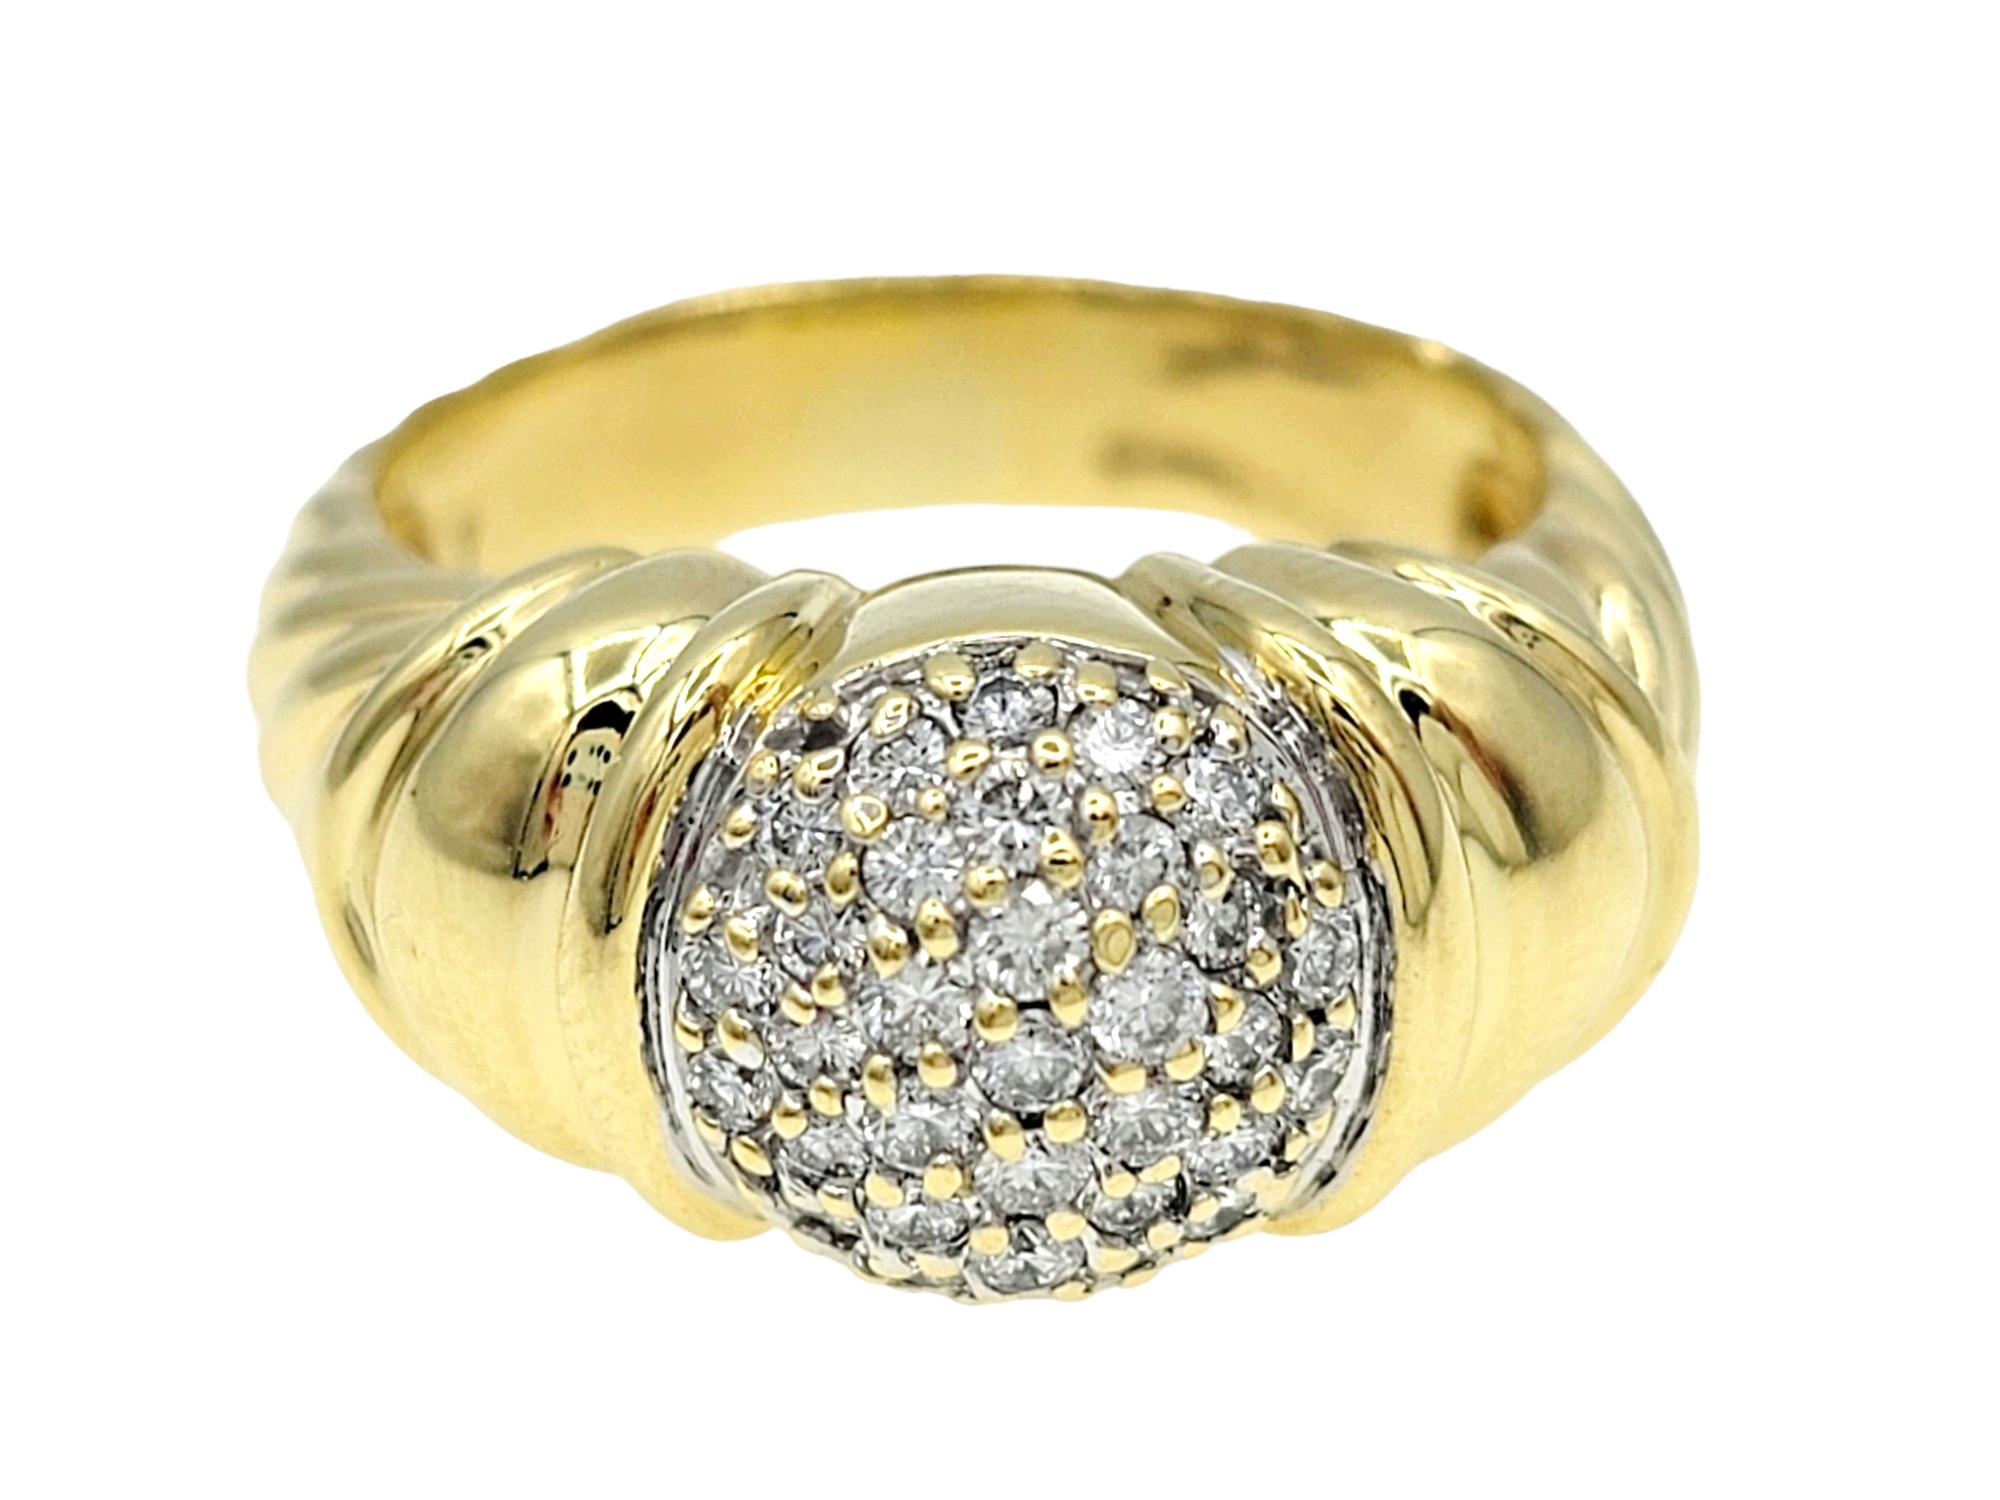 Ring Size: 7

The David Yurman Capri Cable ring in 18 karat yellow gold is a stunning piece that combines classic elegance with distinctive design elements. The center of the ring features a circle adorned with pave diamonds, adding a touch of